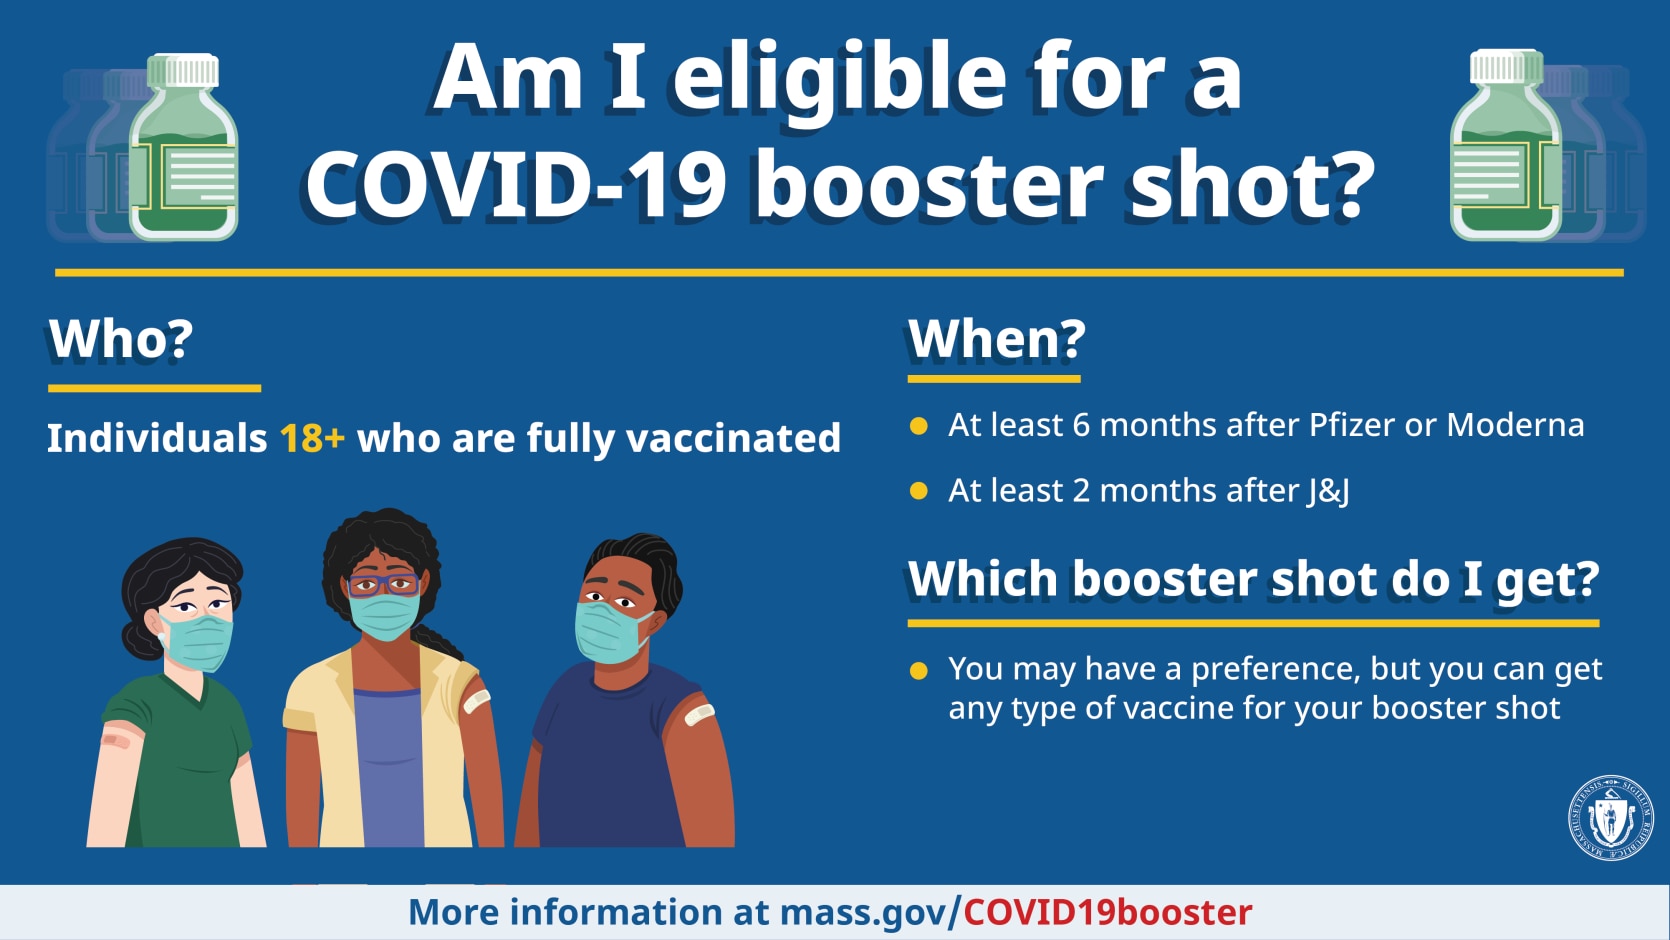 Am I eligible for a COVID-19 booster shot? Who? Individuals 18+ who are fully vaccinated When? O At least 6 months after Pfizer or Moderna • At least 2 months after J&] Which booster shot do I get? You may have a preference, but you can get any type of vaccine for your booster shot More information at mass.gov/COVID19booster